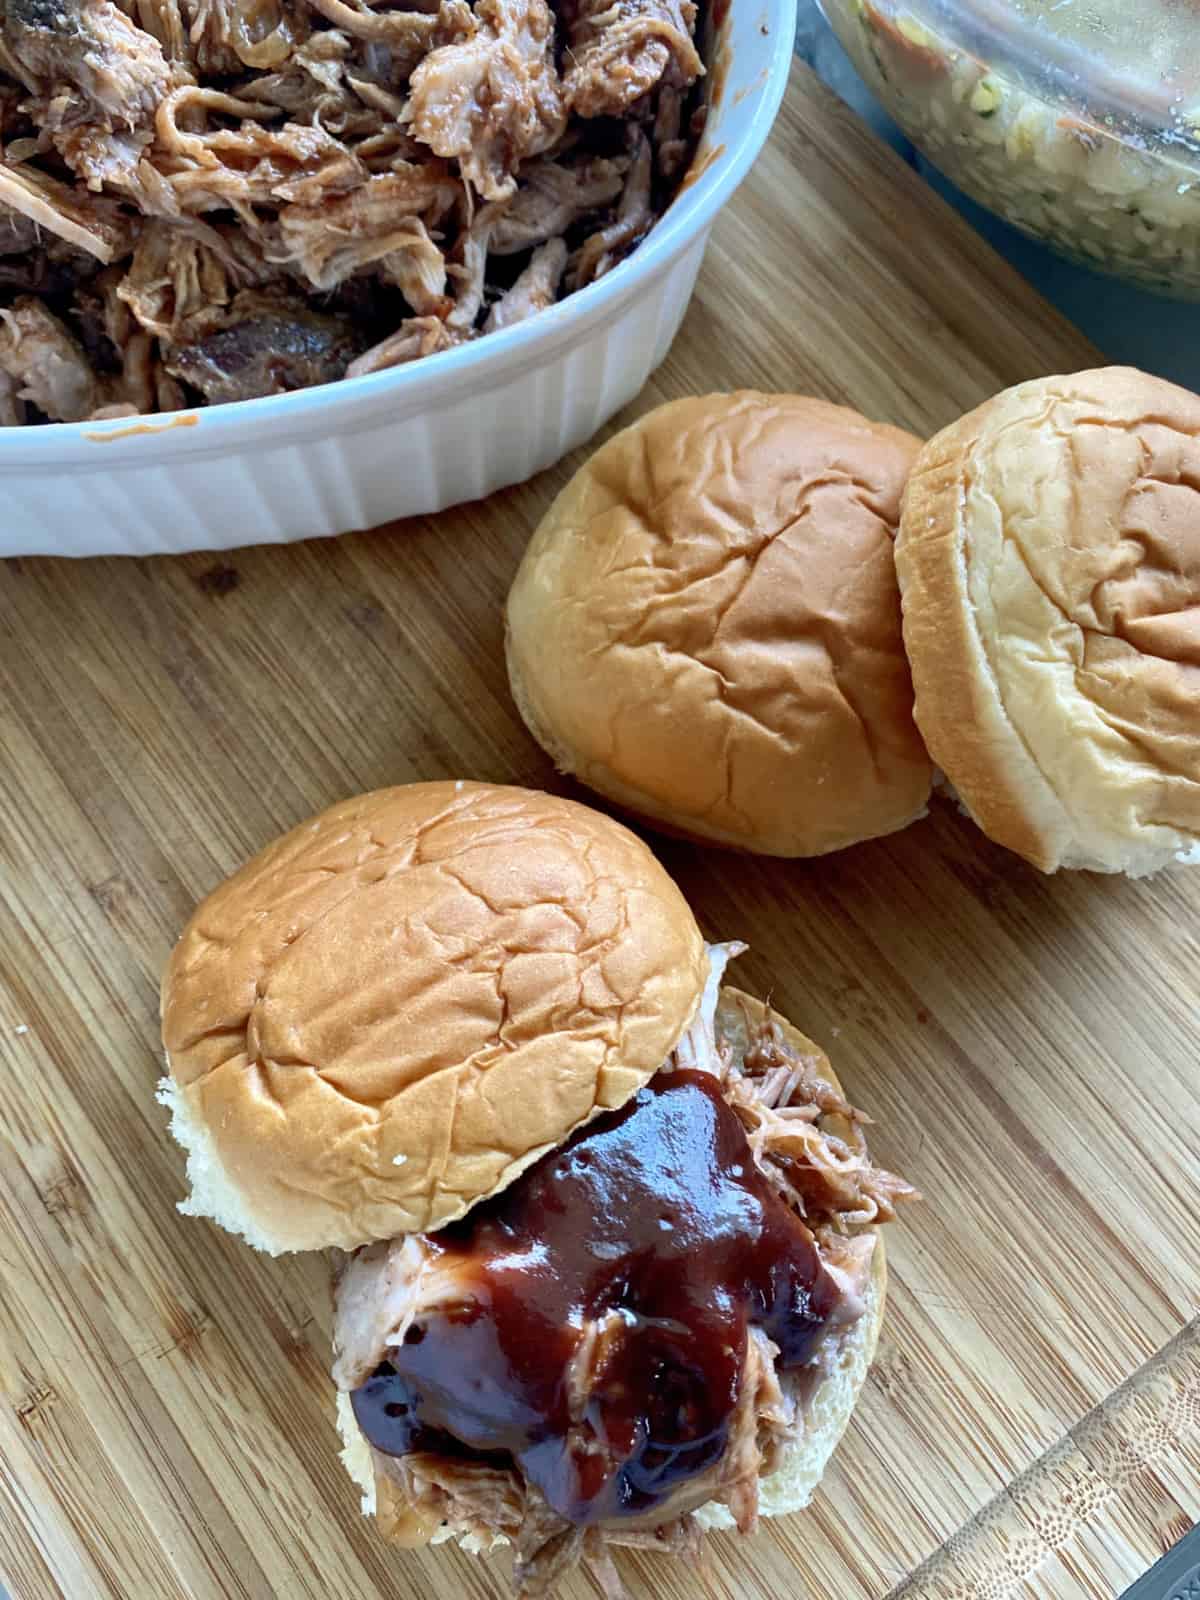 Pulled pork sandwich with barbecue sauce on a wood cutting board.